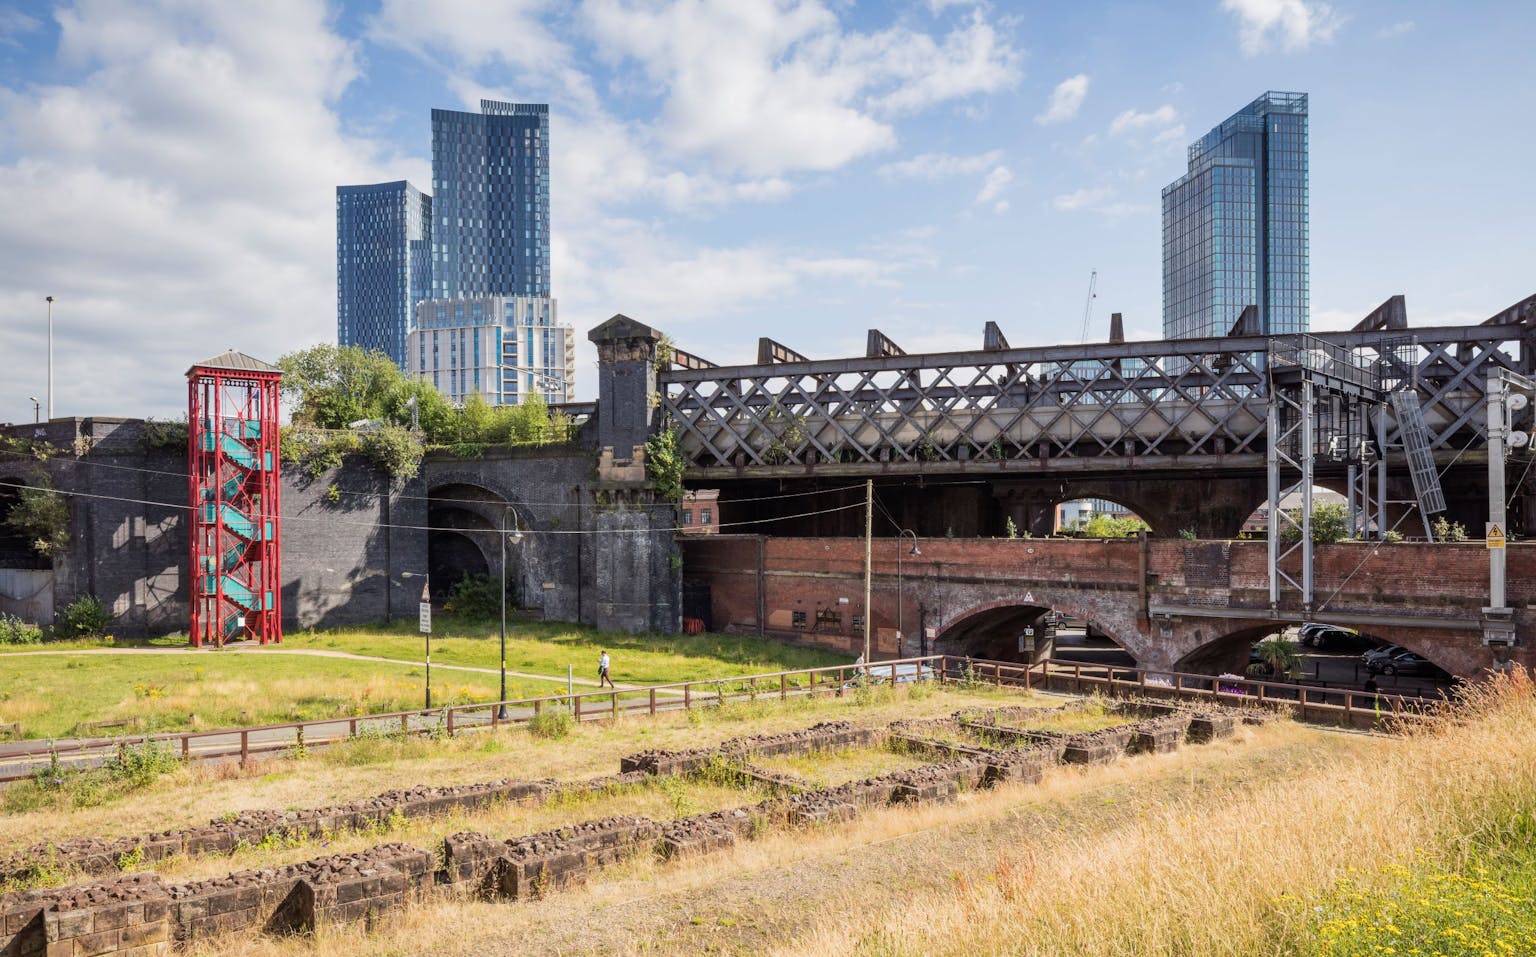 A view across to Castlefield Viaduct in Manchester where a new sky park has been created for the city. Credit James Dobson & National Trust Images